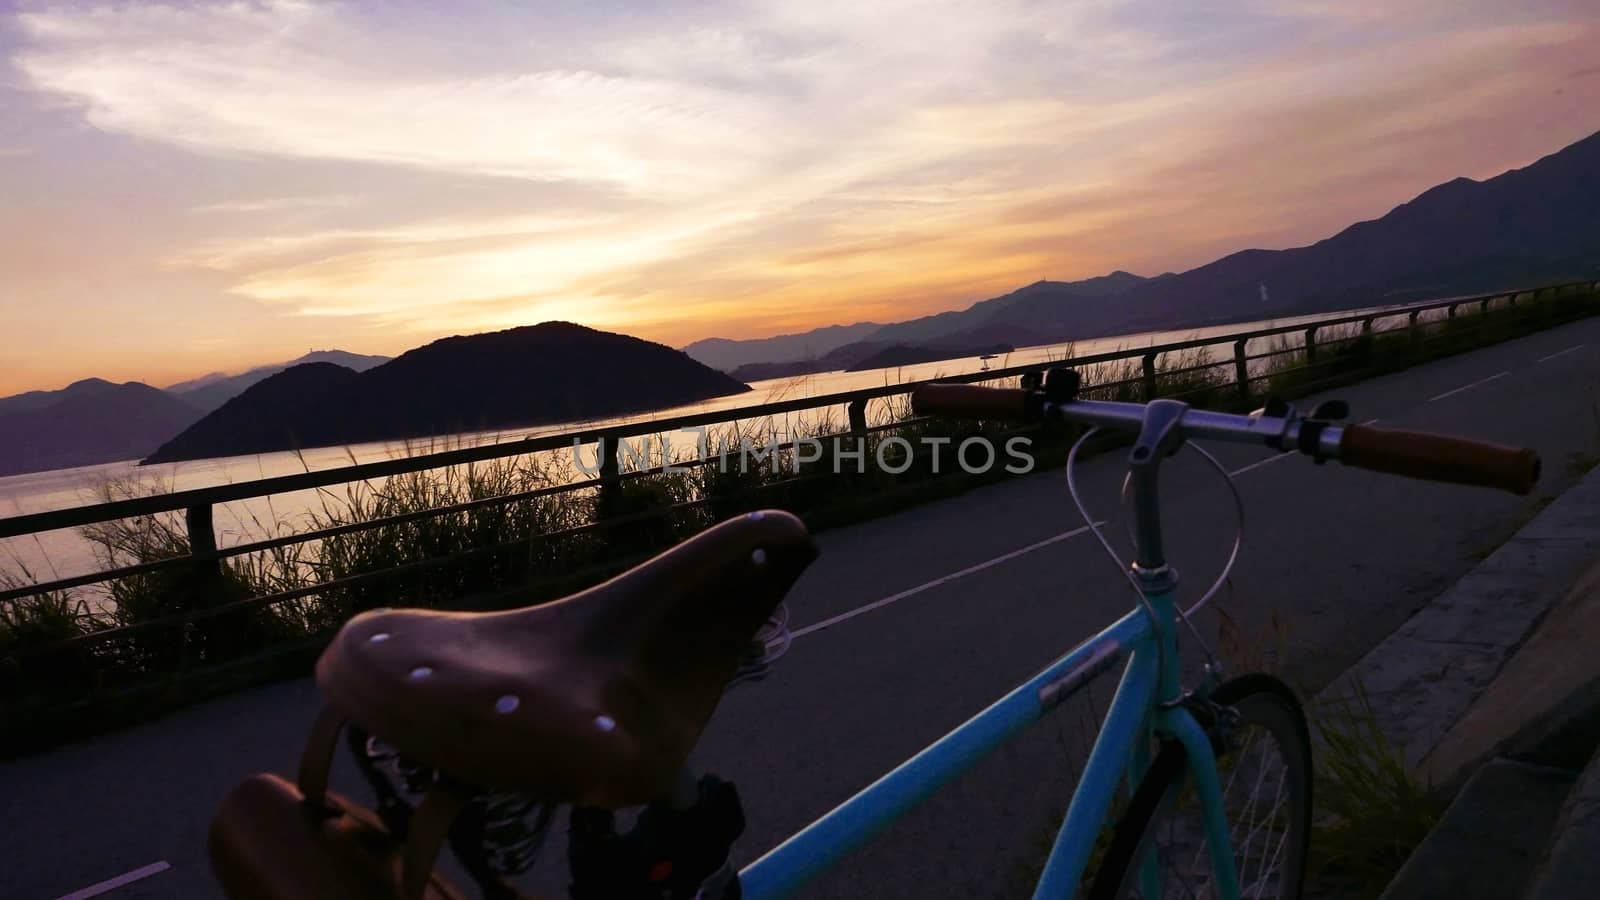 The part of retro bicycle and the frame silhouette at sunset by cougarsan